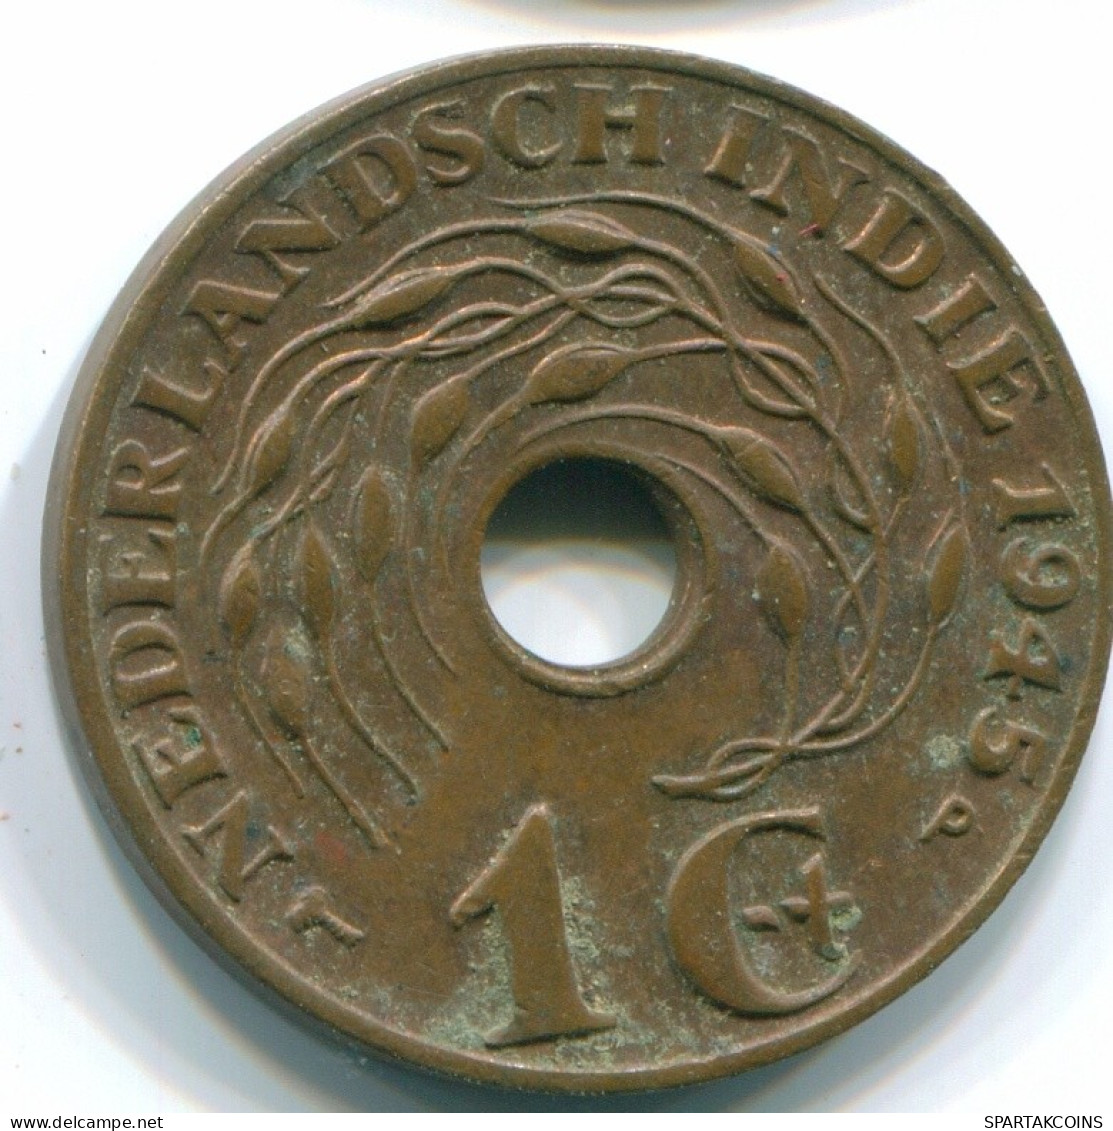 1 CENT 1945 P NETHERLANDS EAST INDIES INDONESIA Bronze Colonial Coin #S10343.U.A - Indes Néerlandaises